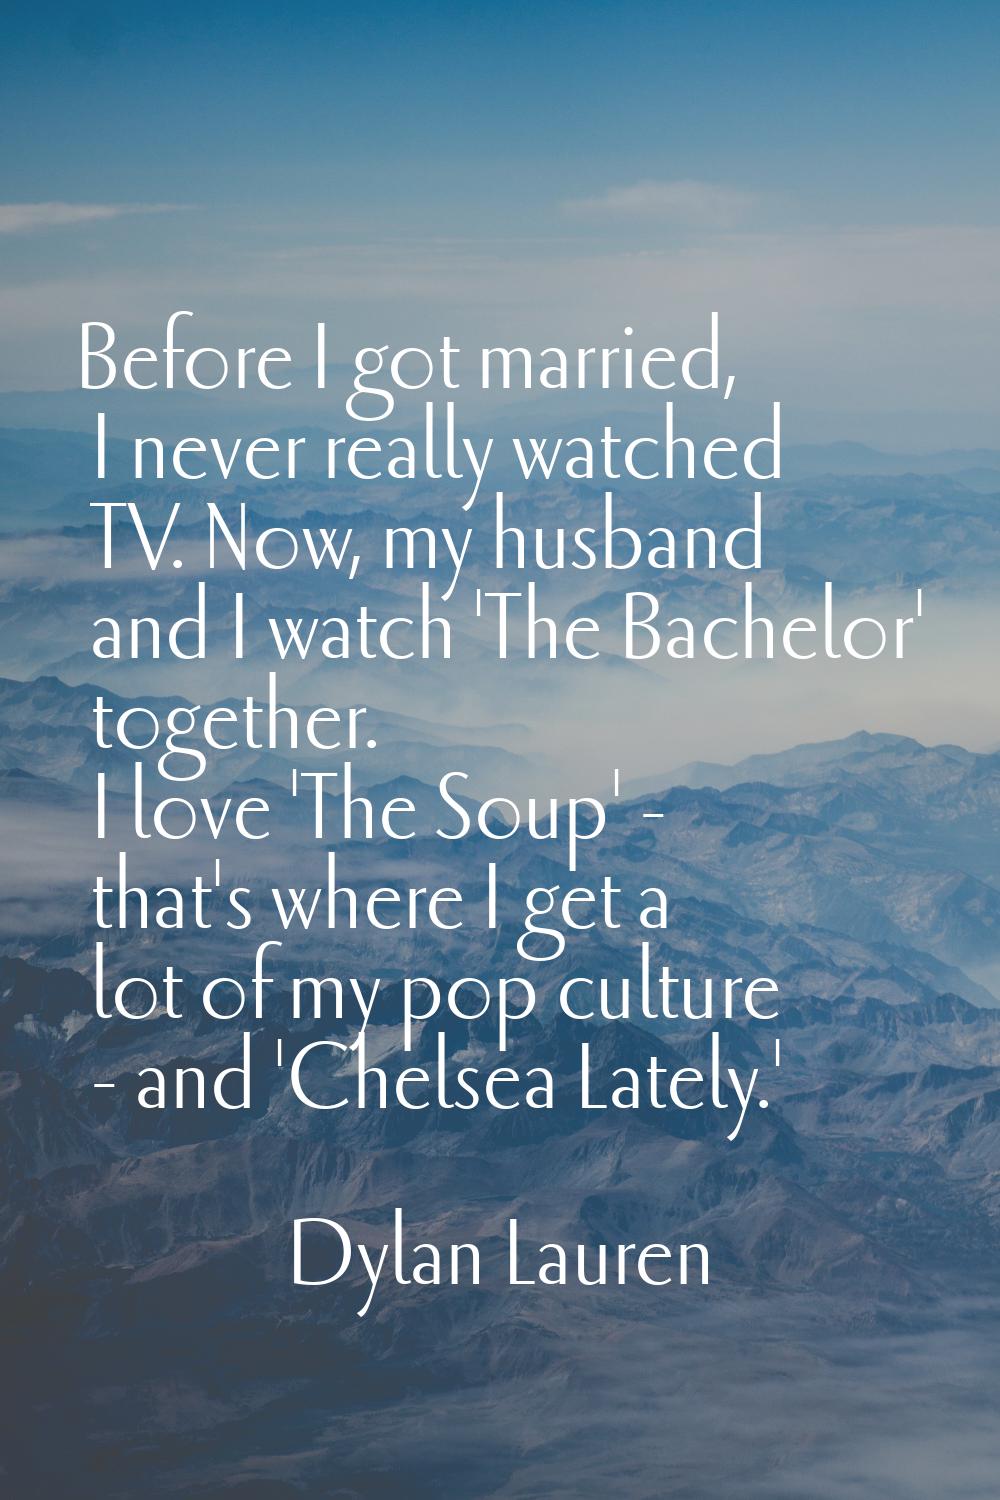 Before I got married, I never really watched TV. Now, my husband and I watch 'The Bachelor' togethe